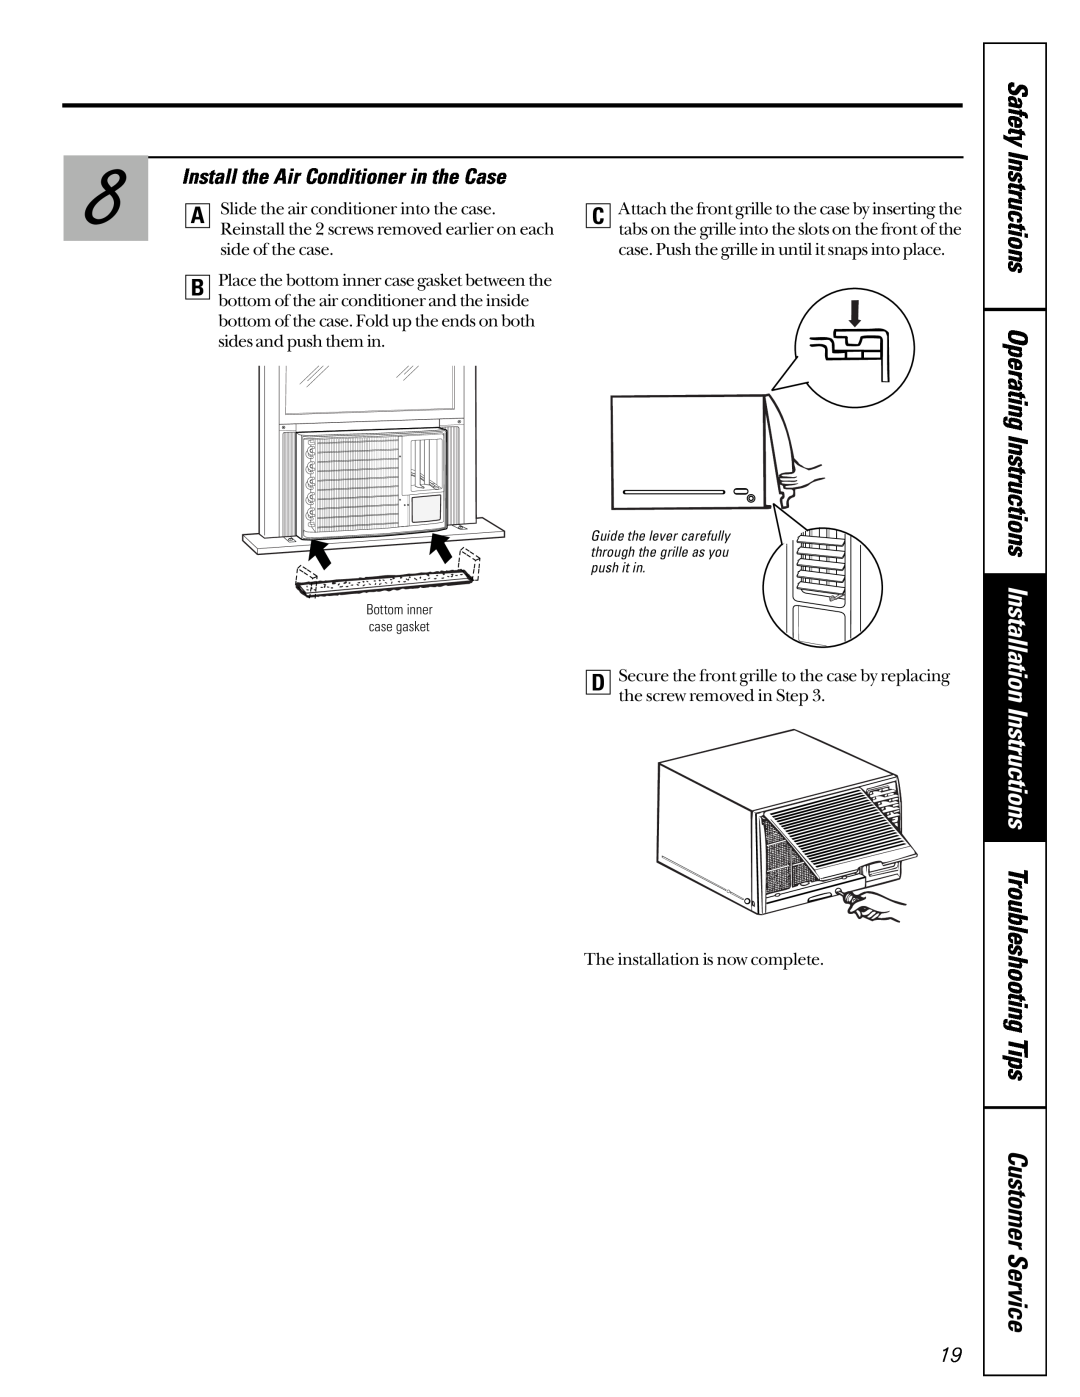 GE AS_05 Installation Instructions Troubleshooting Tips, Safety Instructions Operating Instructions, Customer Service 